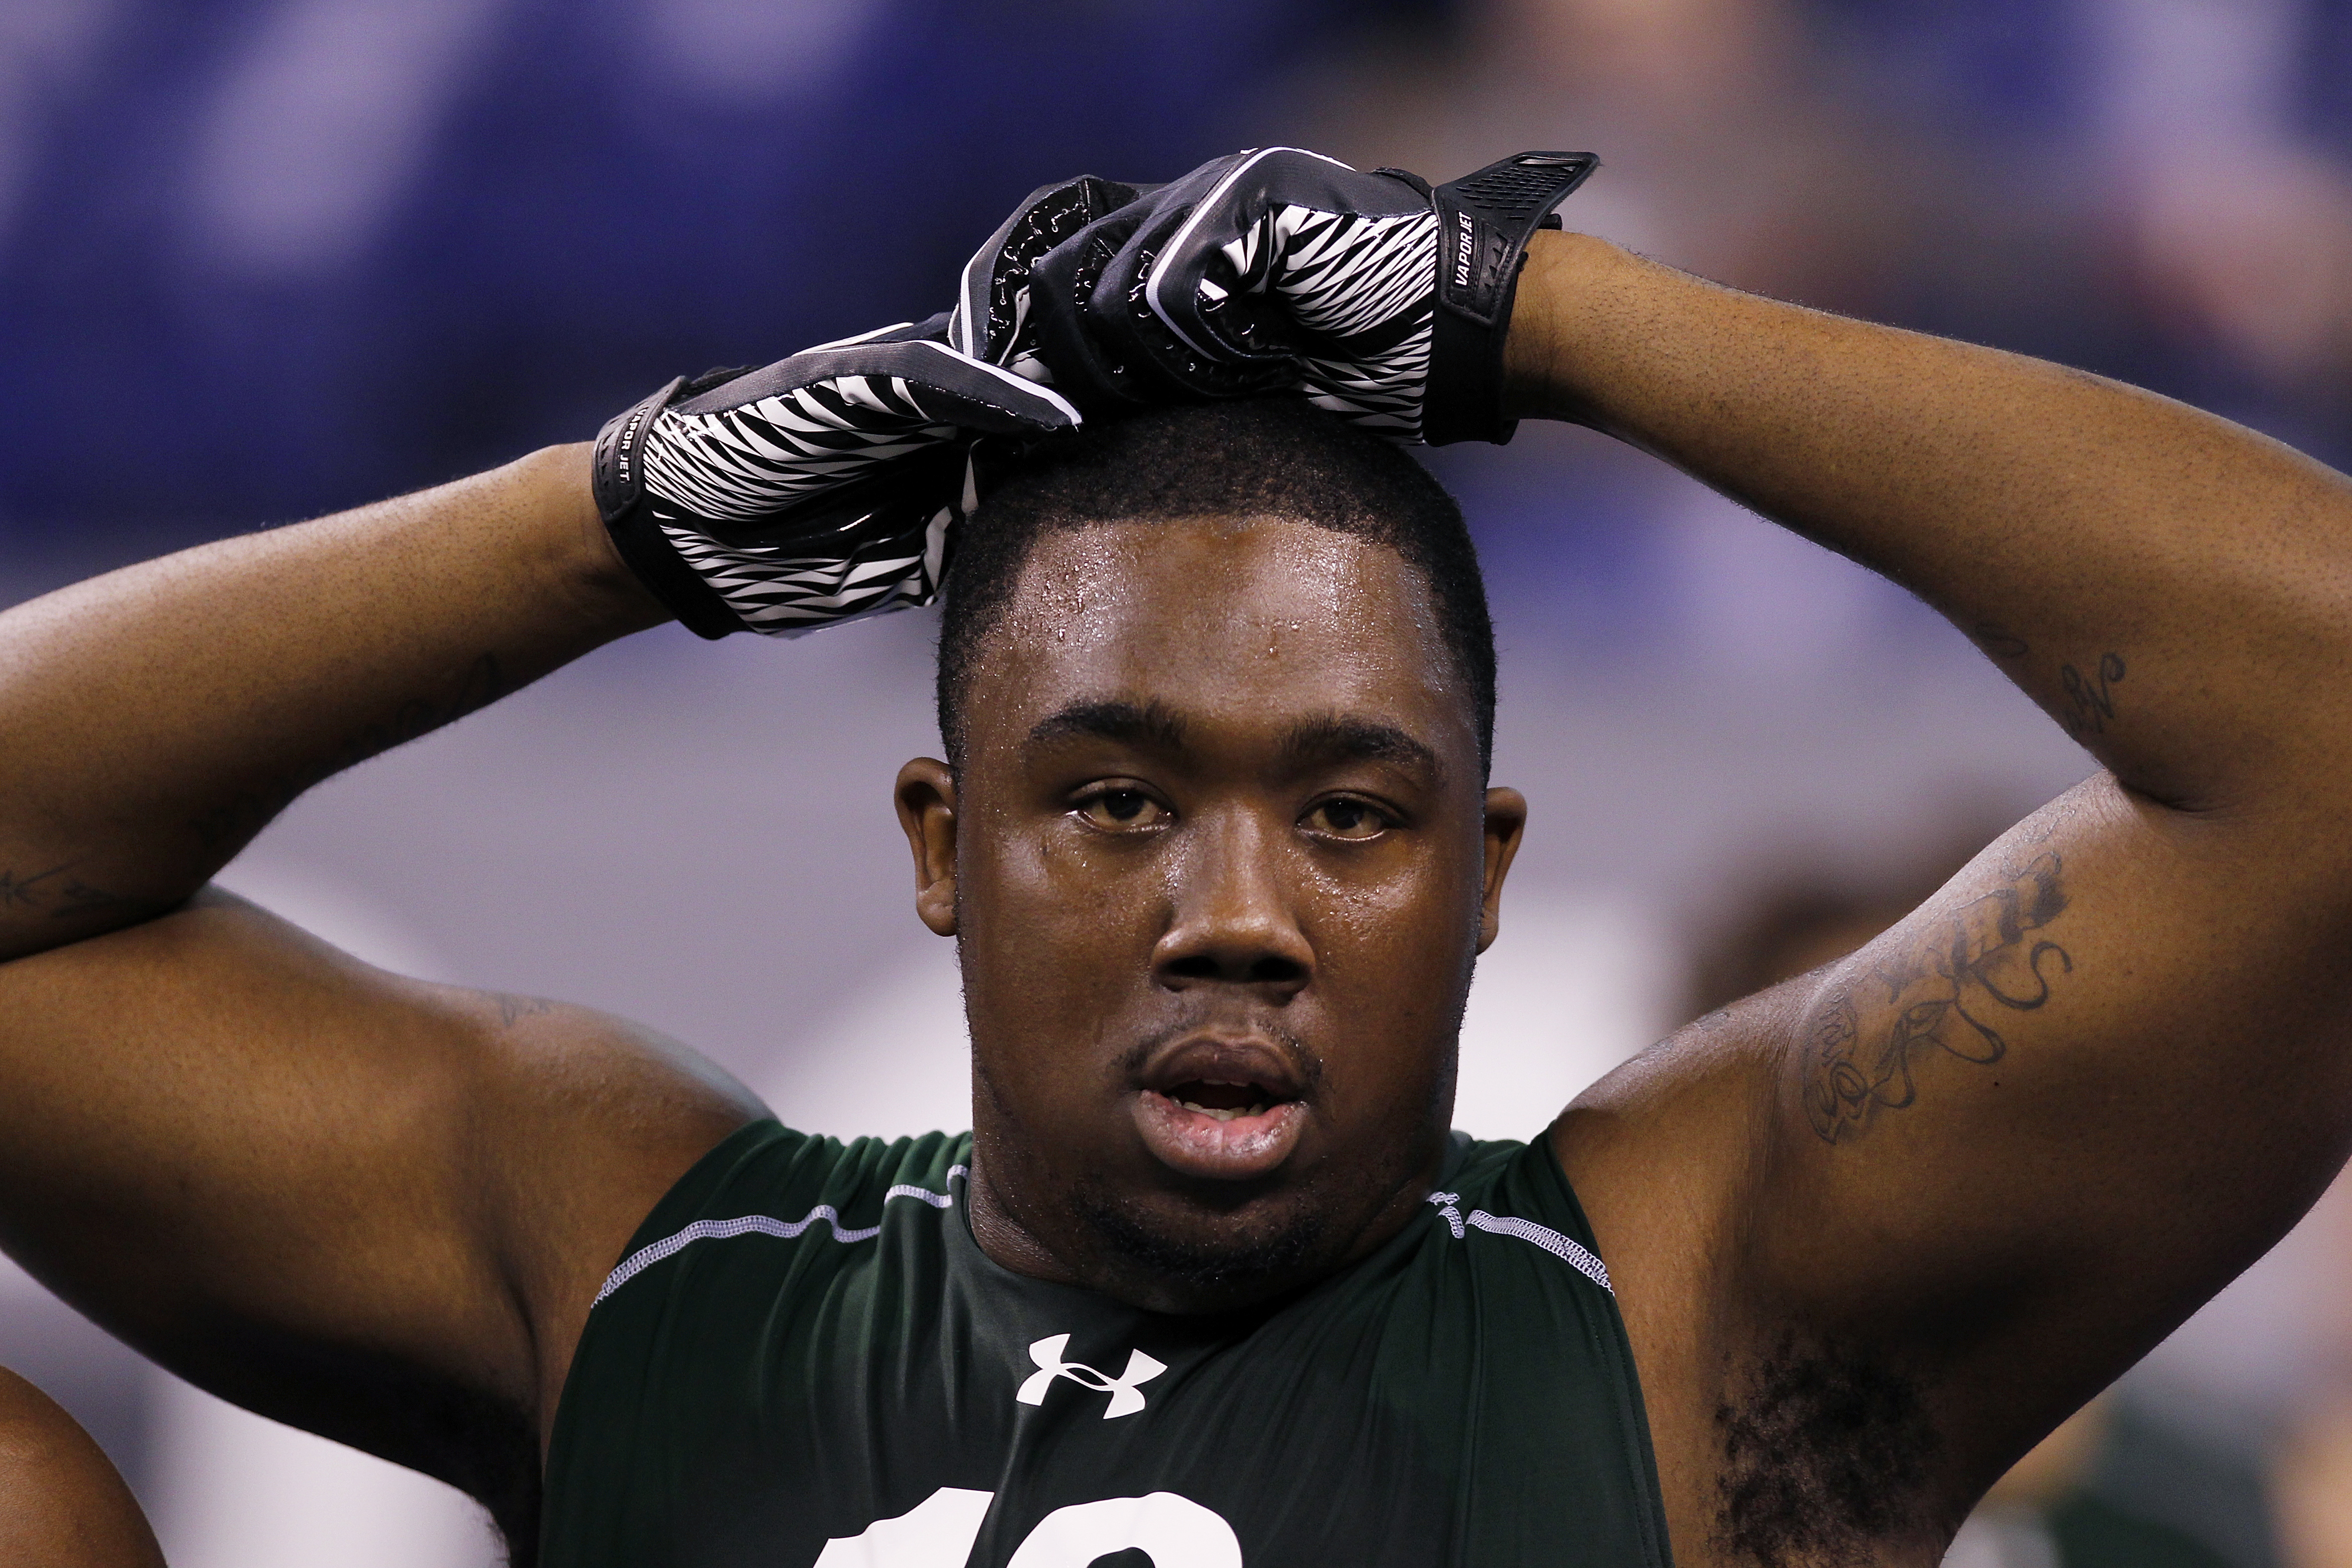 INDIANAPOLIS, IN - FEBRUARY 28:  Defensive lineman Nick Fairley of Auburn looks on during the 2011 NFL Scouting Combine at Lucas Oil Stadium on February 28, 2011 in Indianapolis, Indiana. (Photo by Joe Robbins/Getty Images)